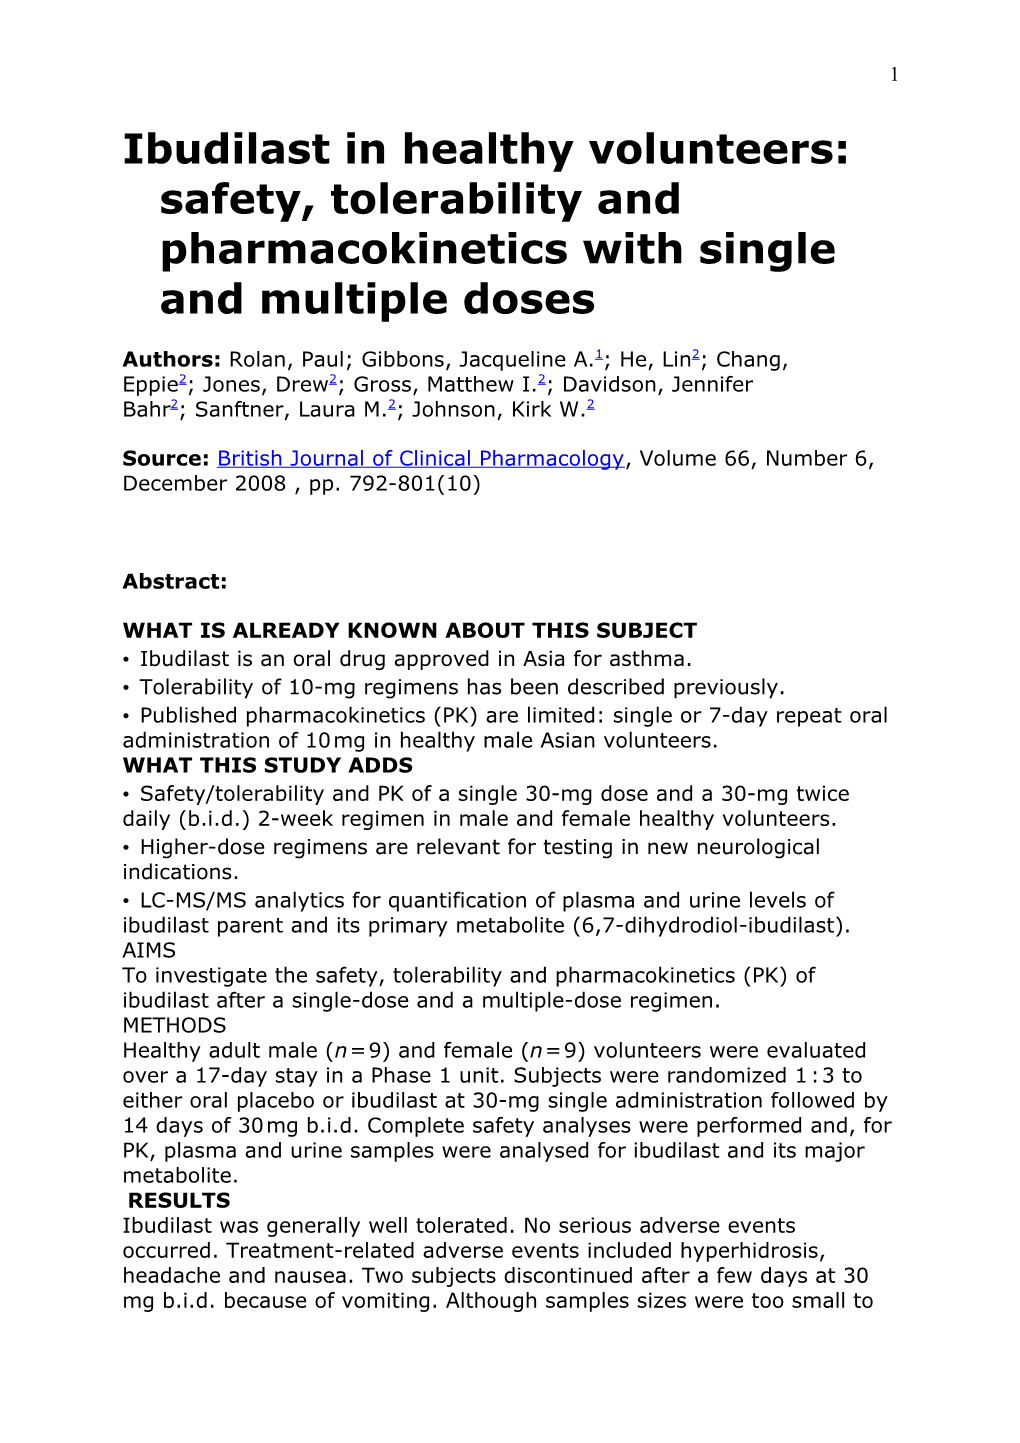 Ibudilast in Healthy Volunteers: Safety, Tolerability and Pharmacokinetics with Single